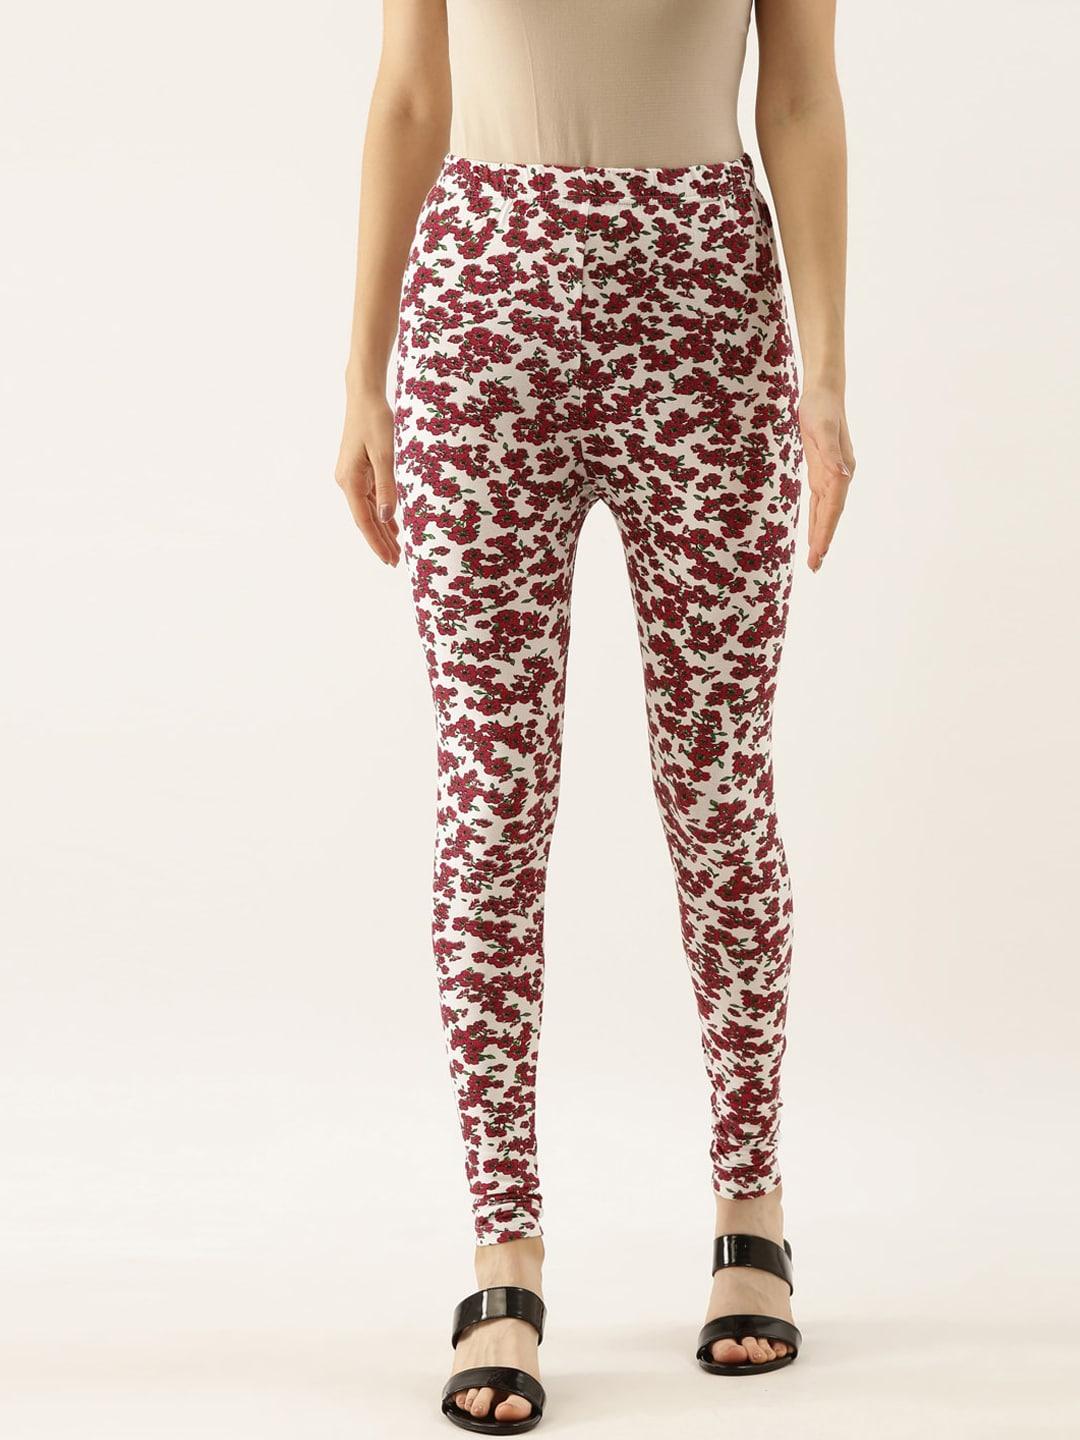 souchii-women-white-&-red-printed-slim-fit-ankle-length-leggings